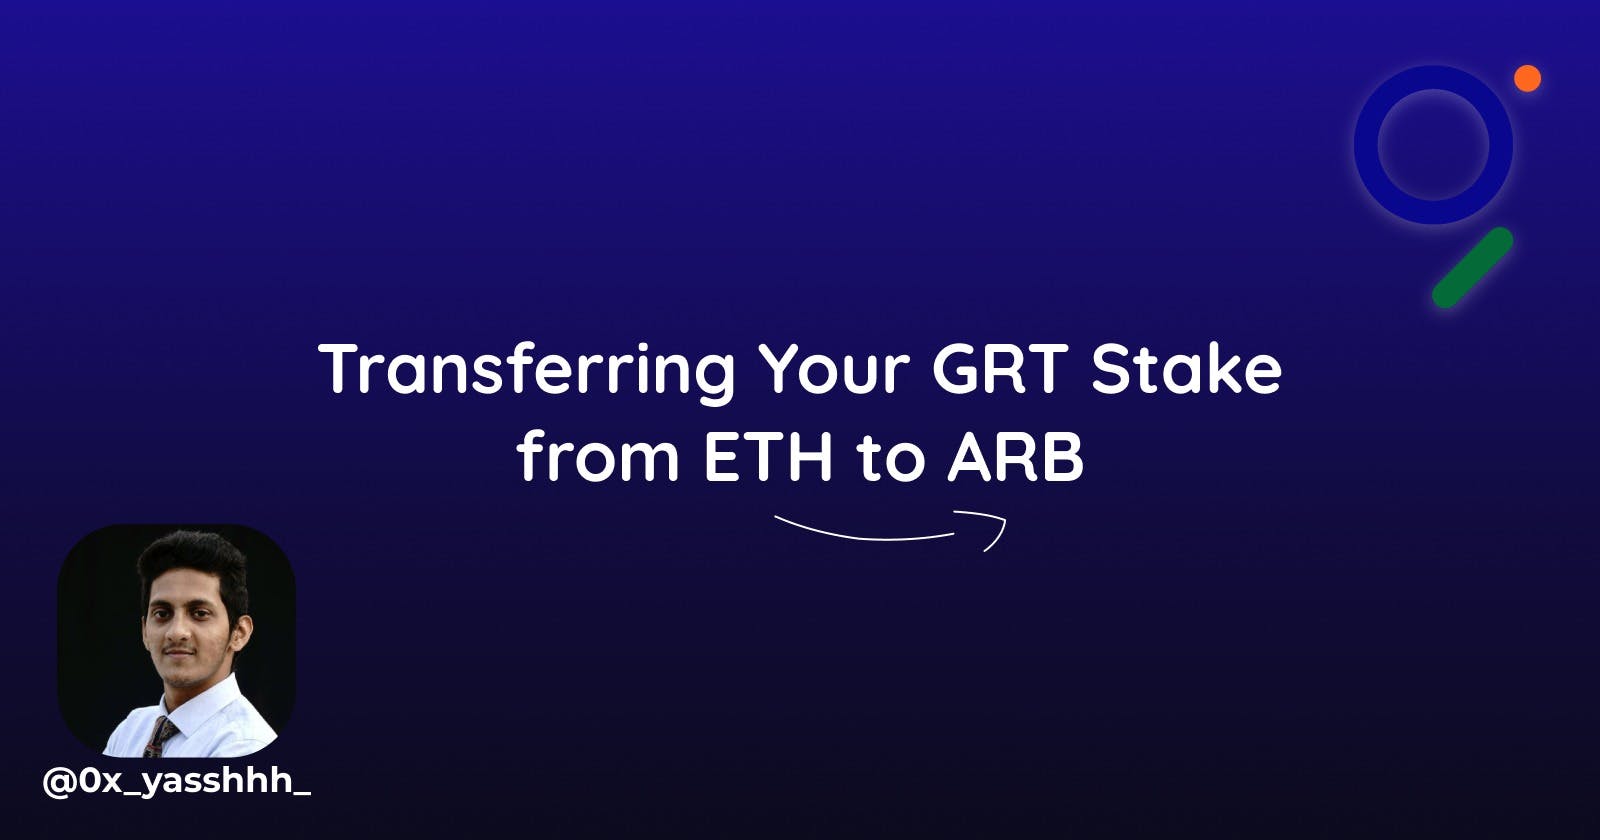 A Step-by-Step Guide to Transferring Your GRT Stake from Ethereum Mainnet to Arbitrum One